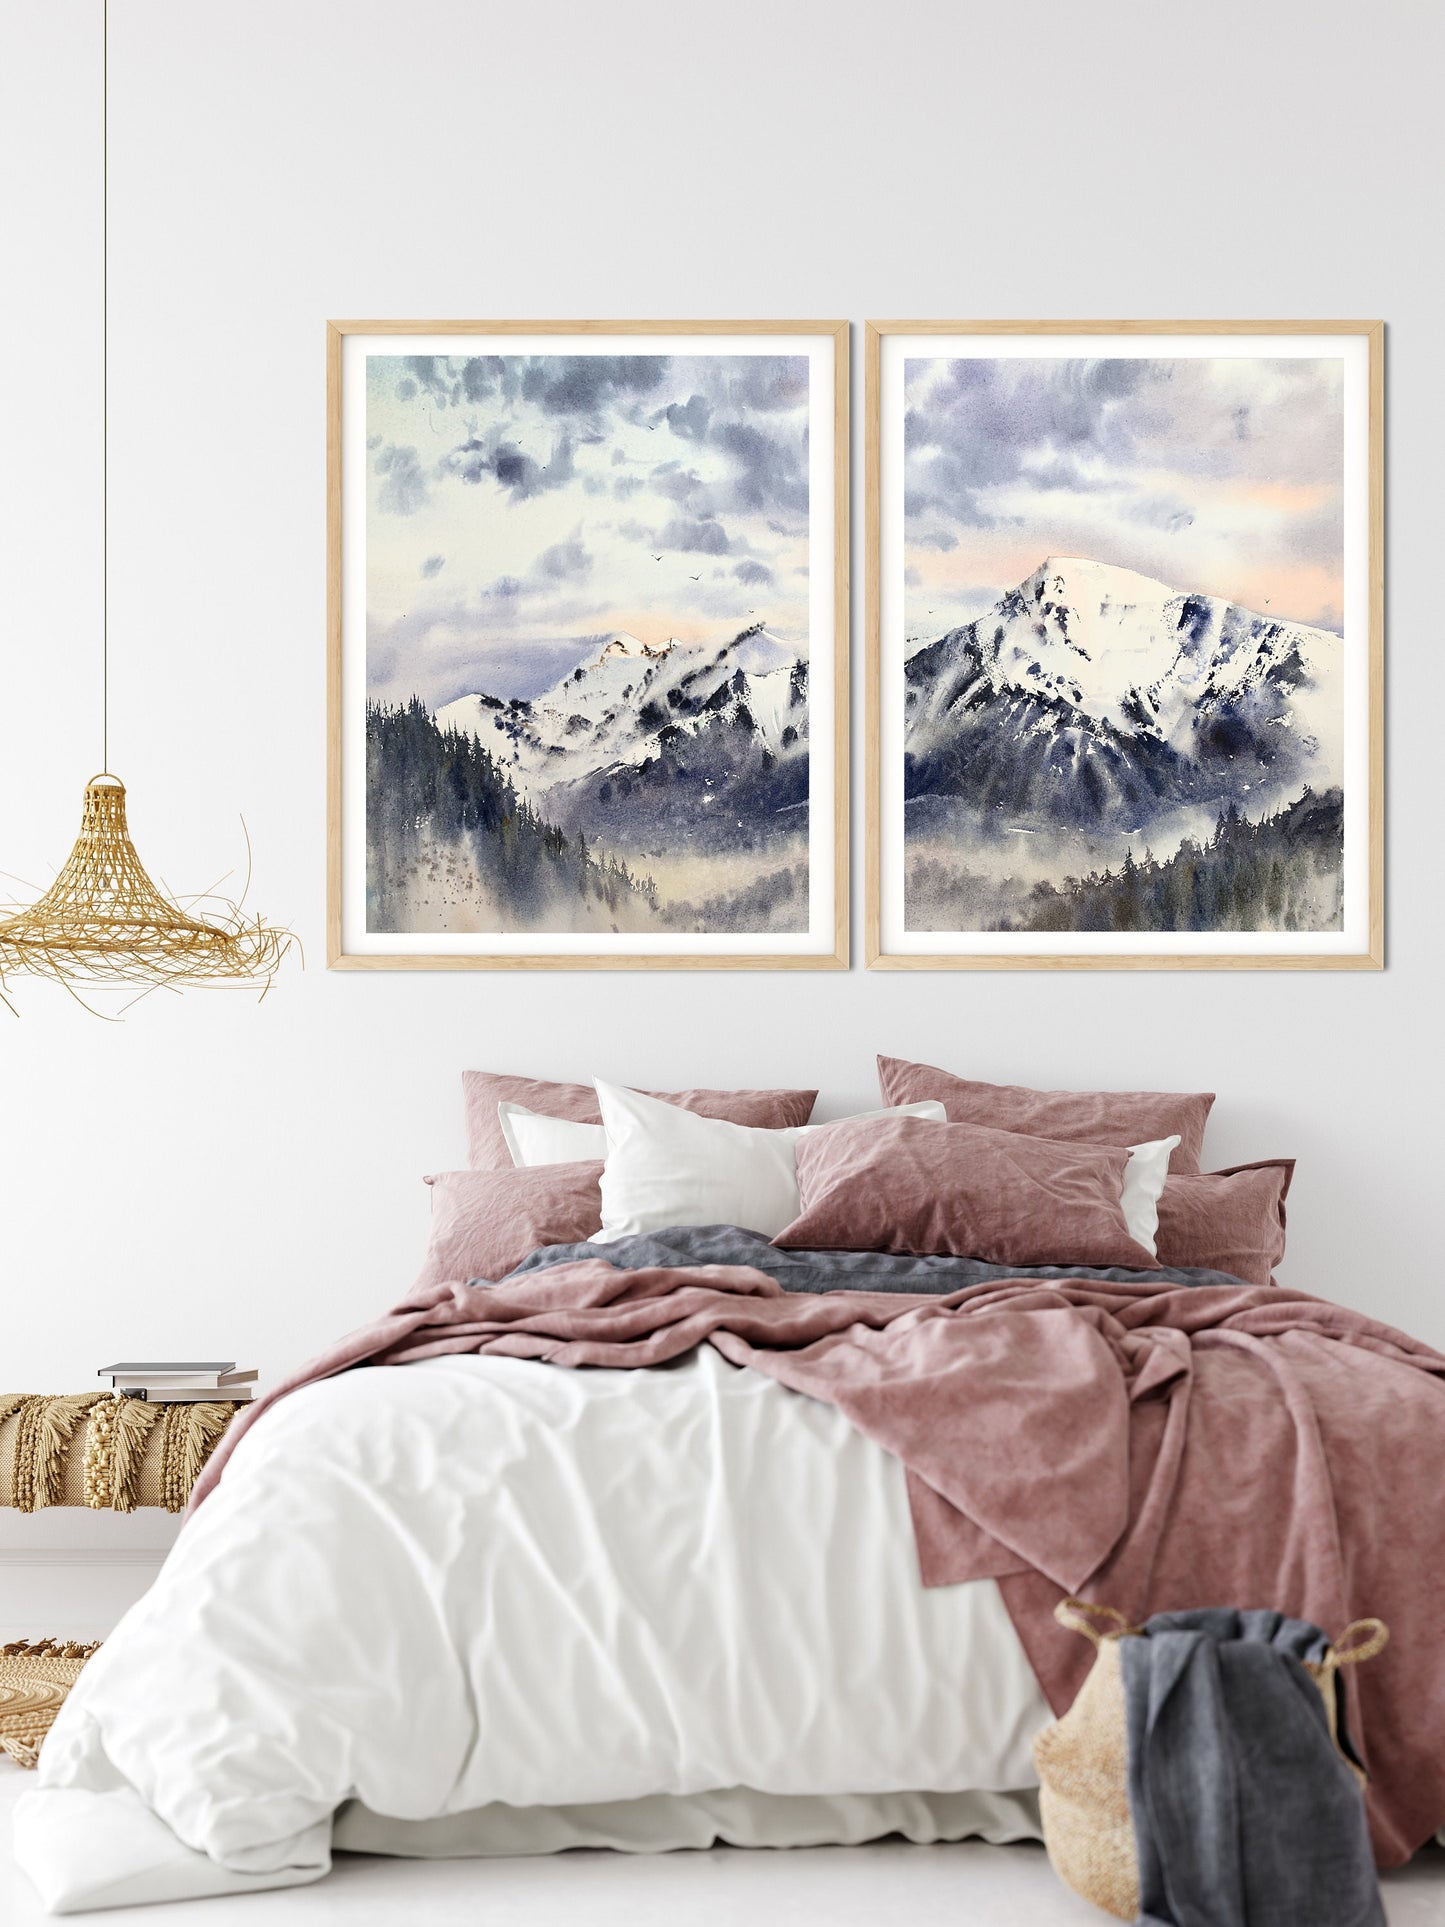 Mountain Landscape Print SET of Two Split, Nature Wall Art, Contemporary Painting, Watercolor Pine Trees, Peak